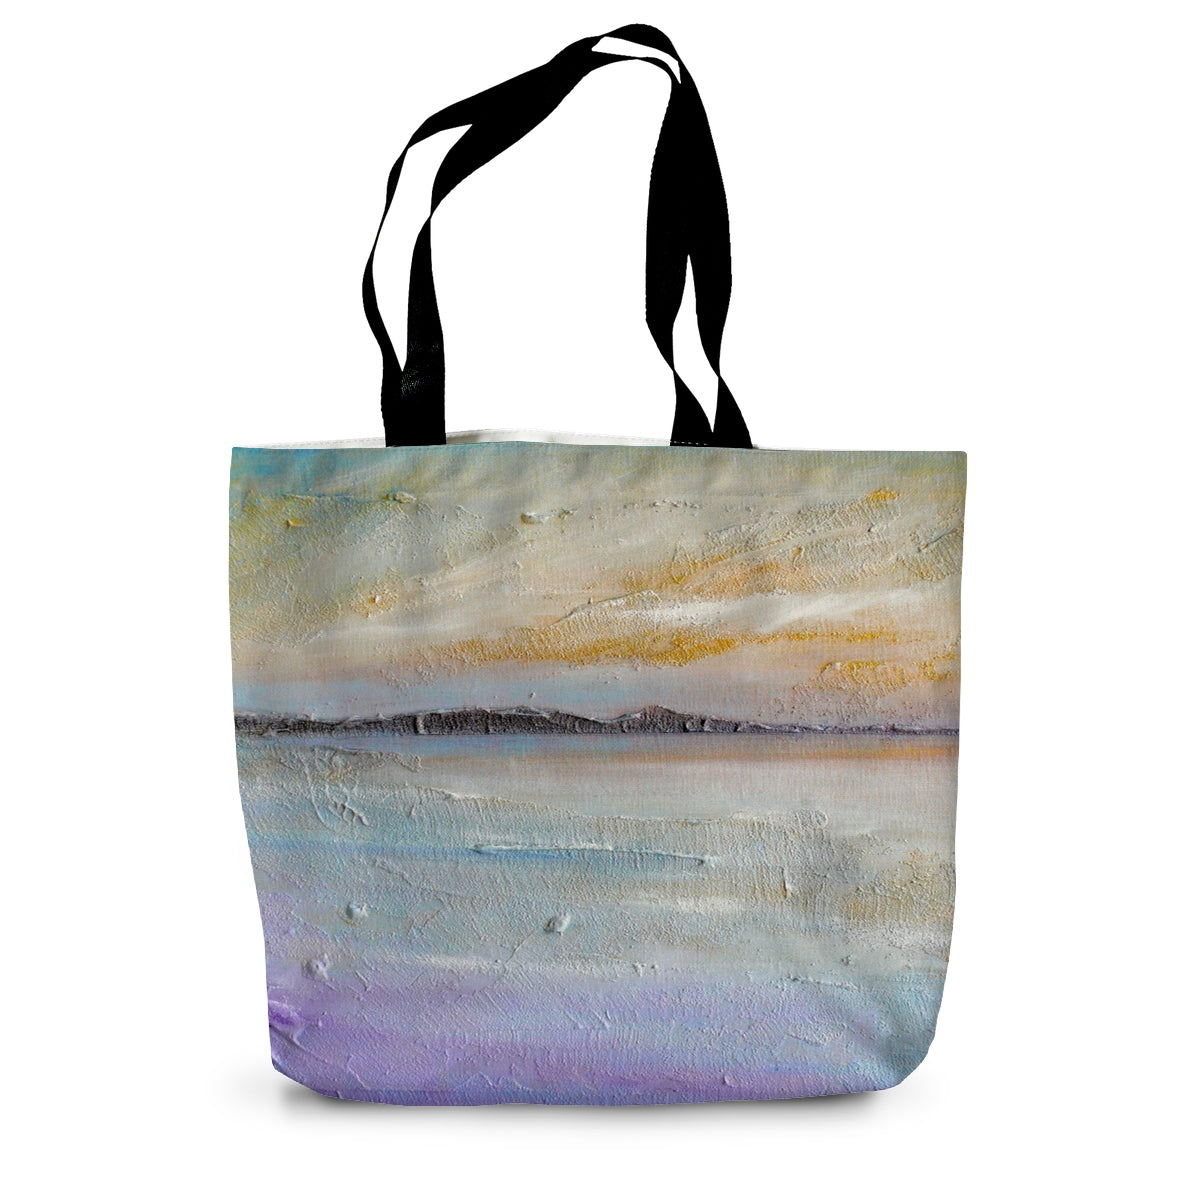 Sollas Beach South Uist Art Gifts Canvas Tote Bag-Bags-Hebridean Islands Art Gallery-14"x18.5"-Paintings, Prints, Homeware, Art Gifts From Scotland By Scottish Artist Kevin Hunter